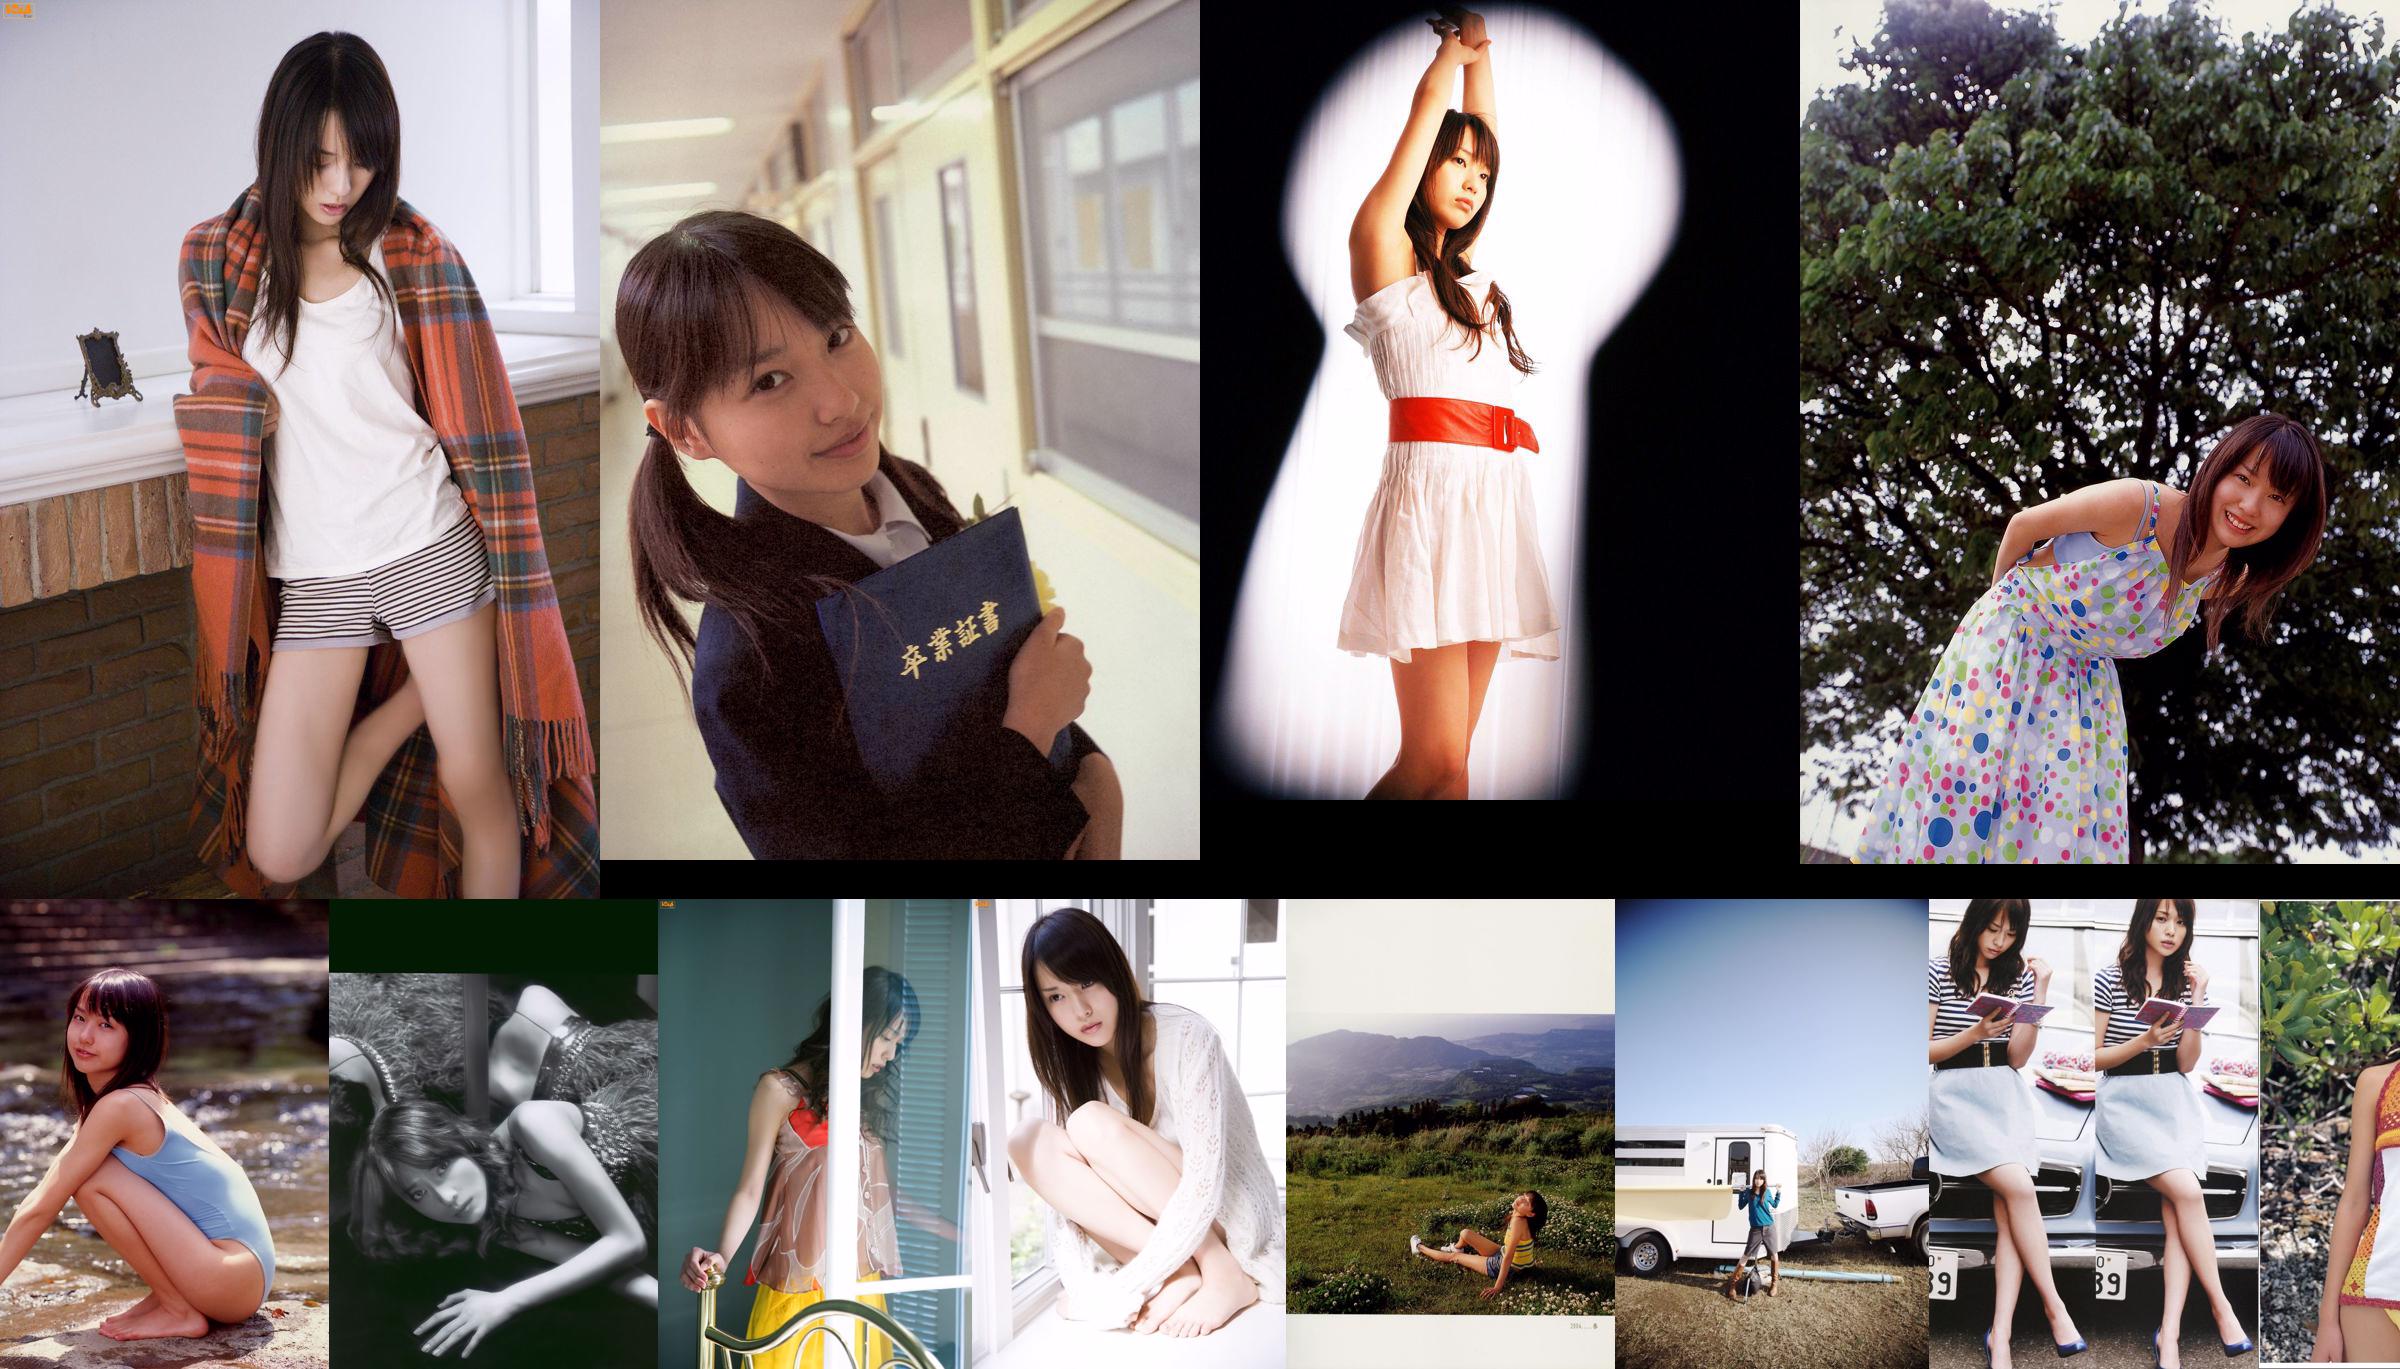 [Bomb.TV] May 2007 Erika Toda Erika Toda / Erika Toda No.34246a Page 1